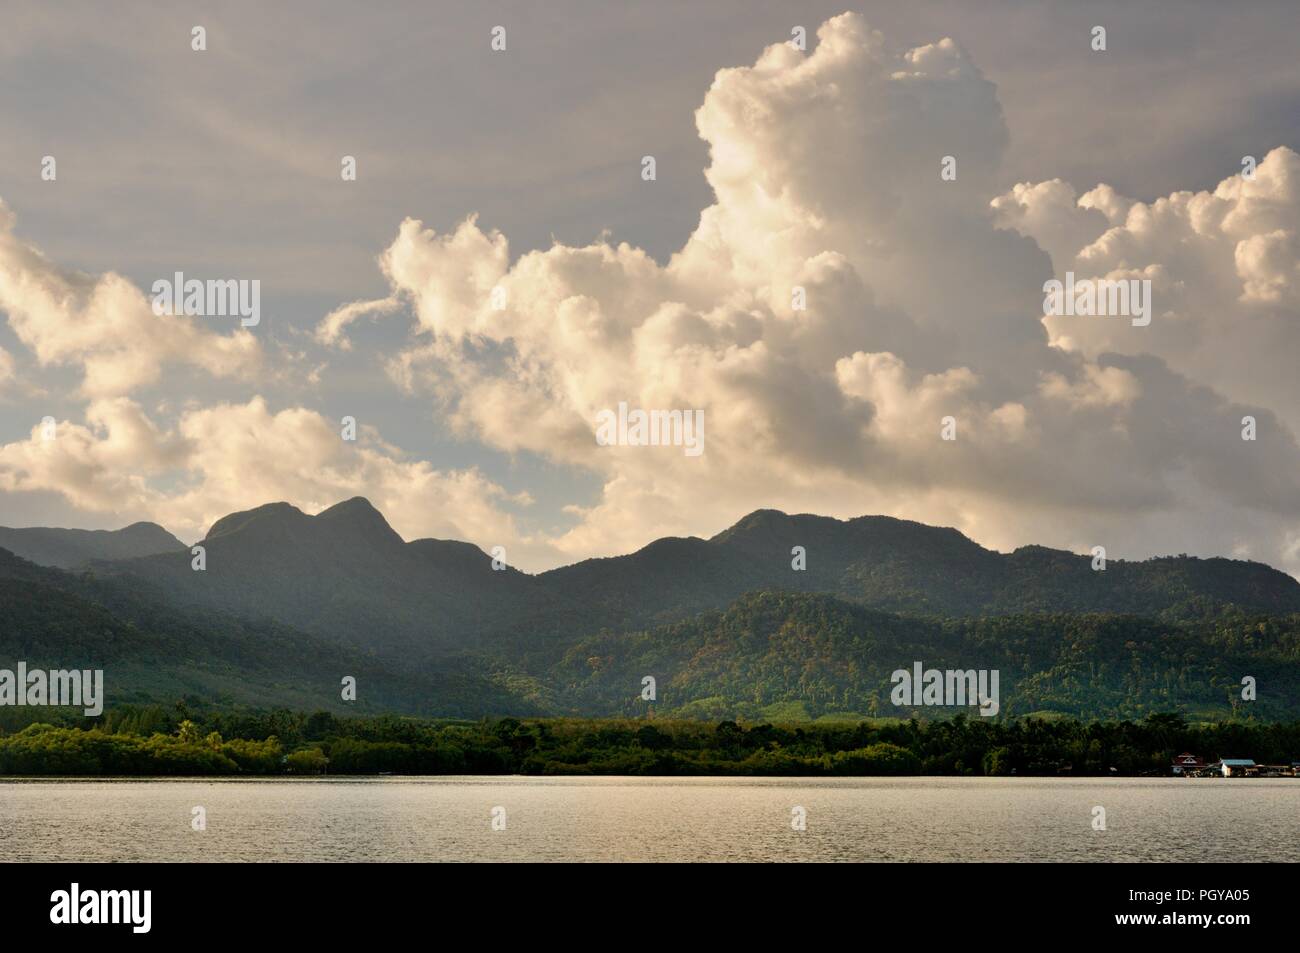 Cumulus clouds in sunset sky over Koh Chang island, Thailand. Stock Photo